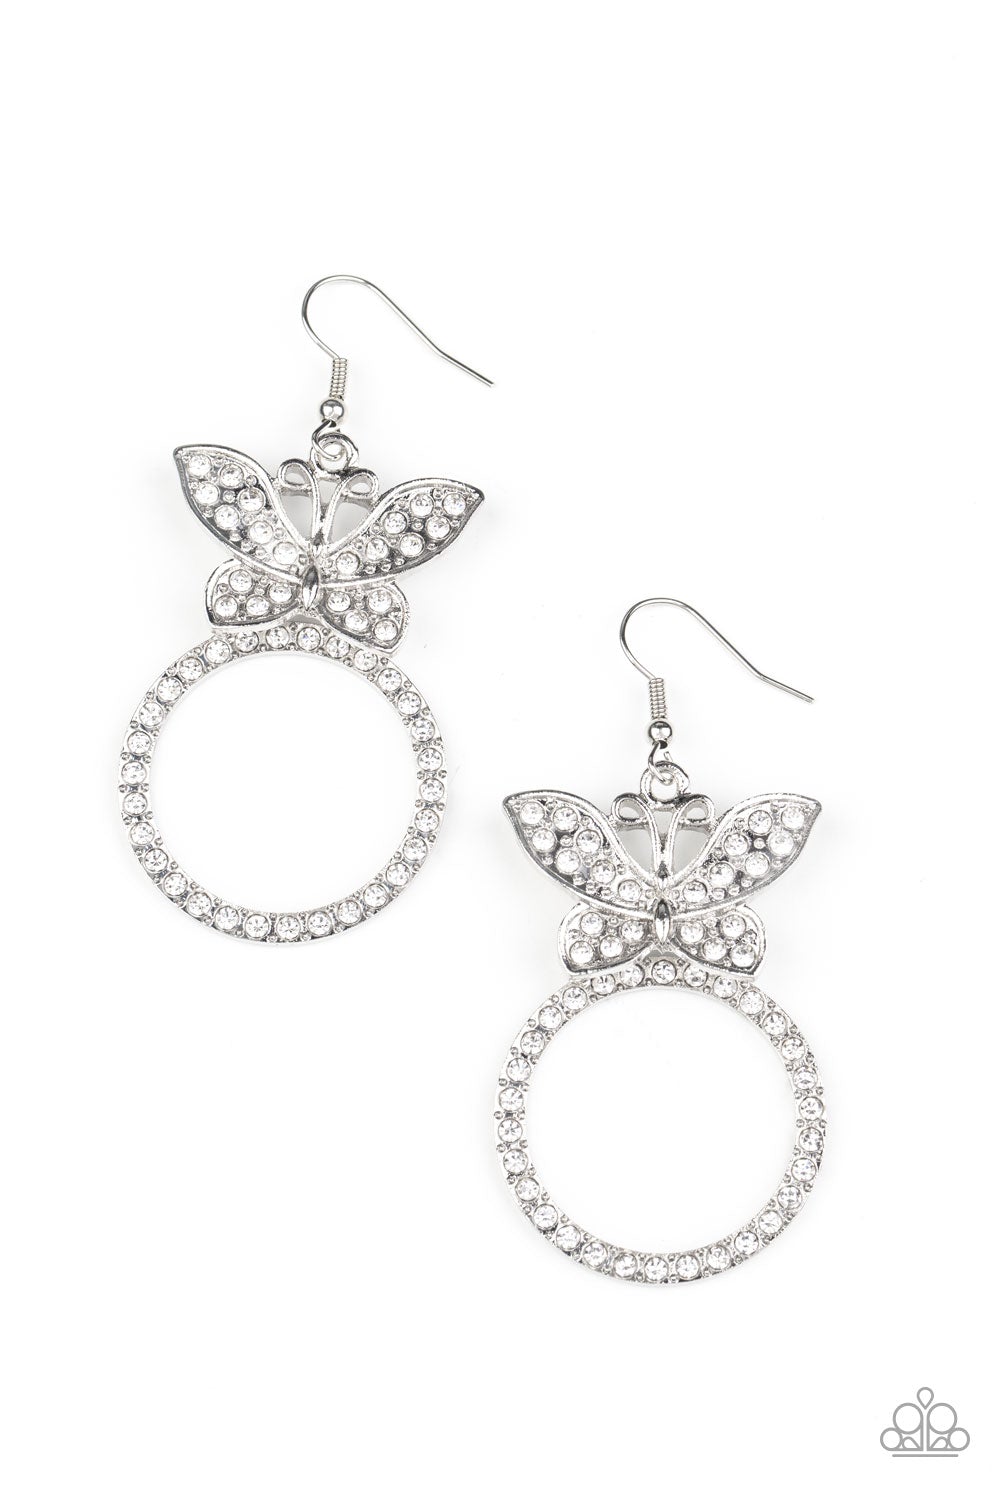 Paradise Found White Paparazzi Life of the Party Exclusive Earrings